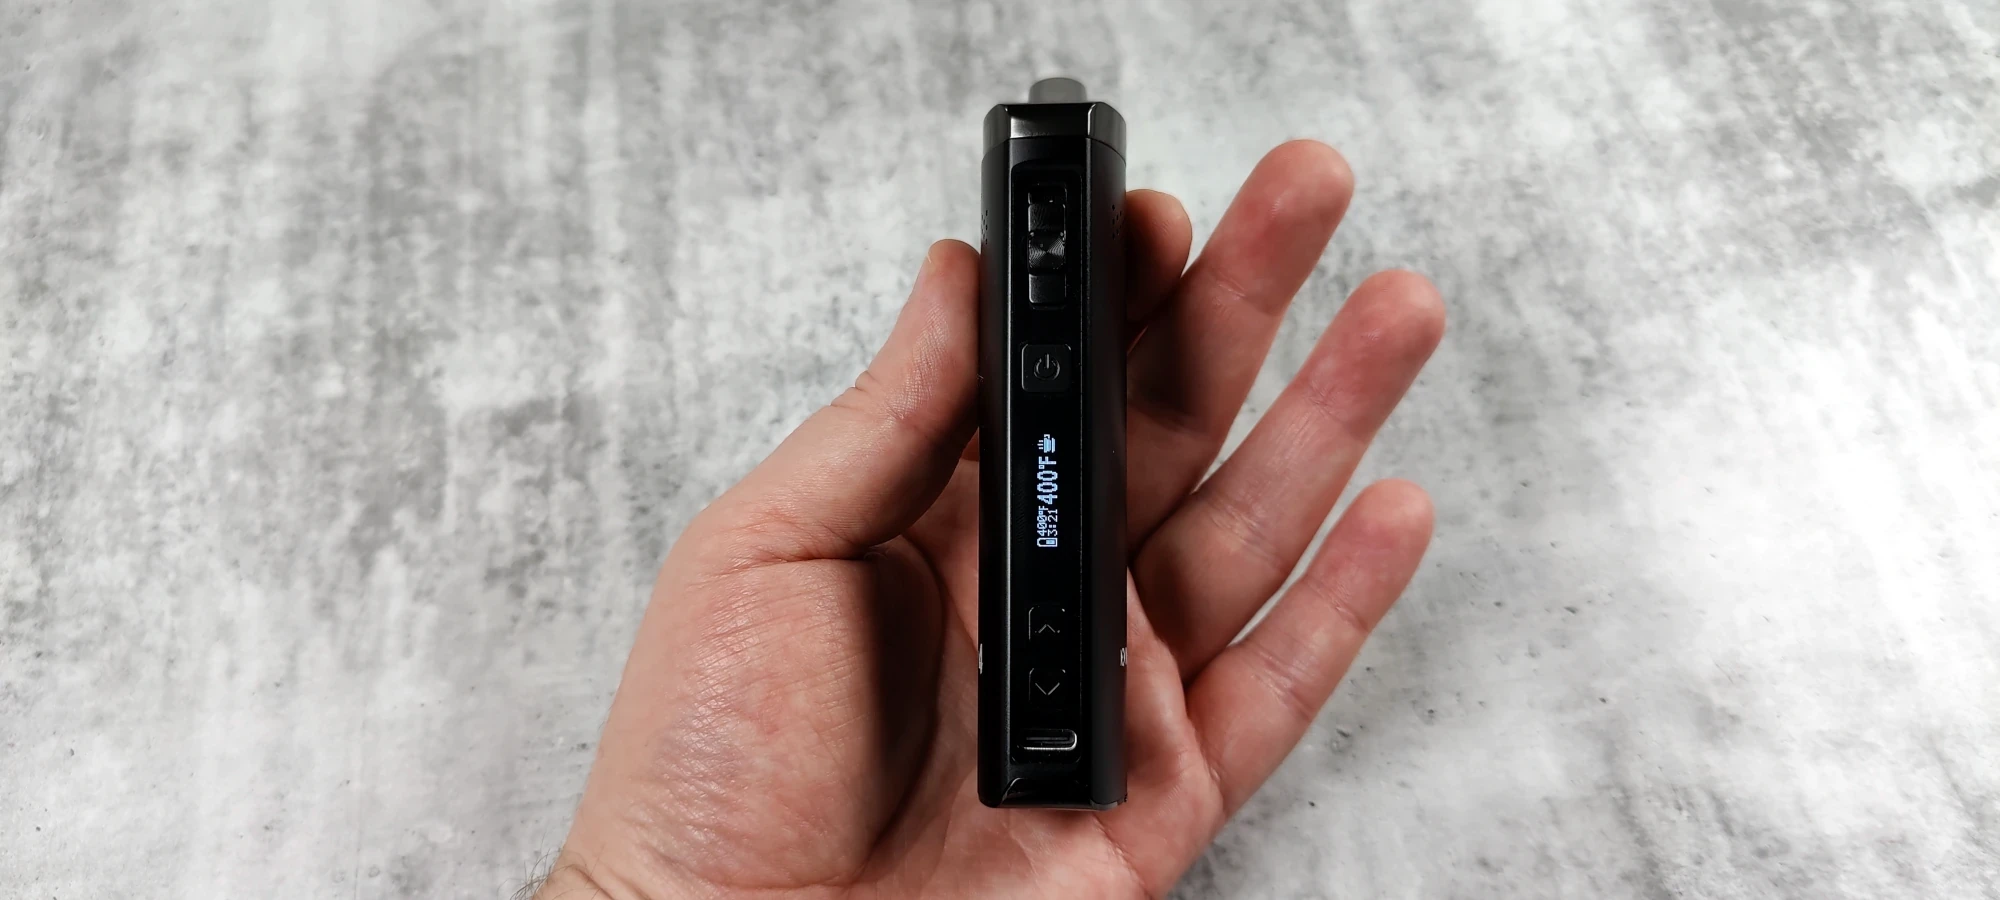 XMAX Starry 4 turned on and vaporizing